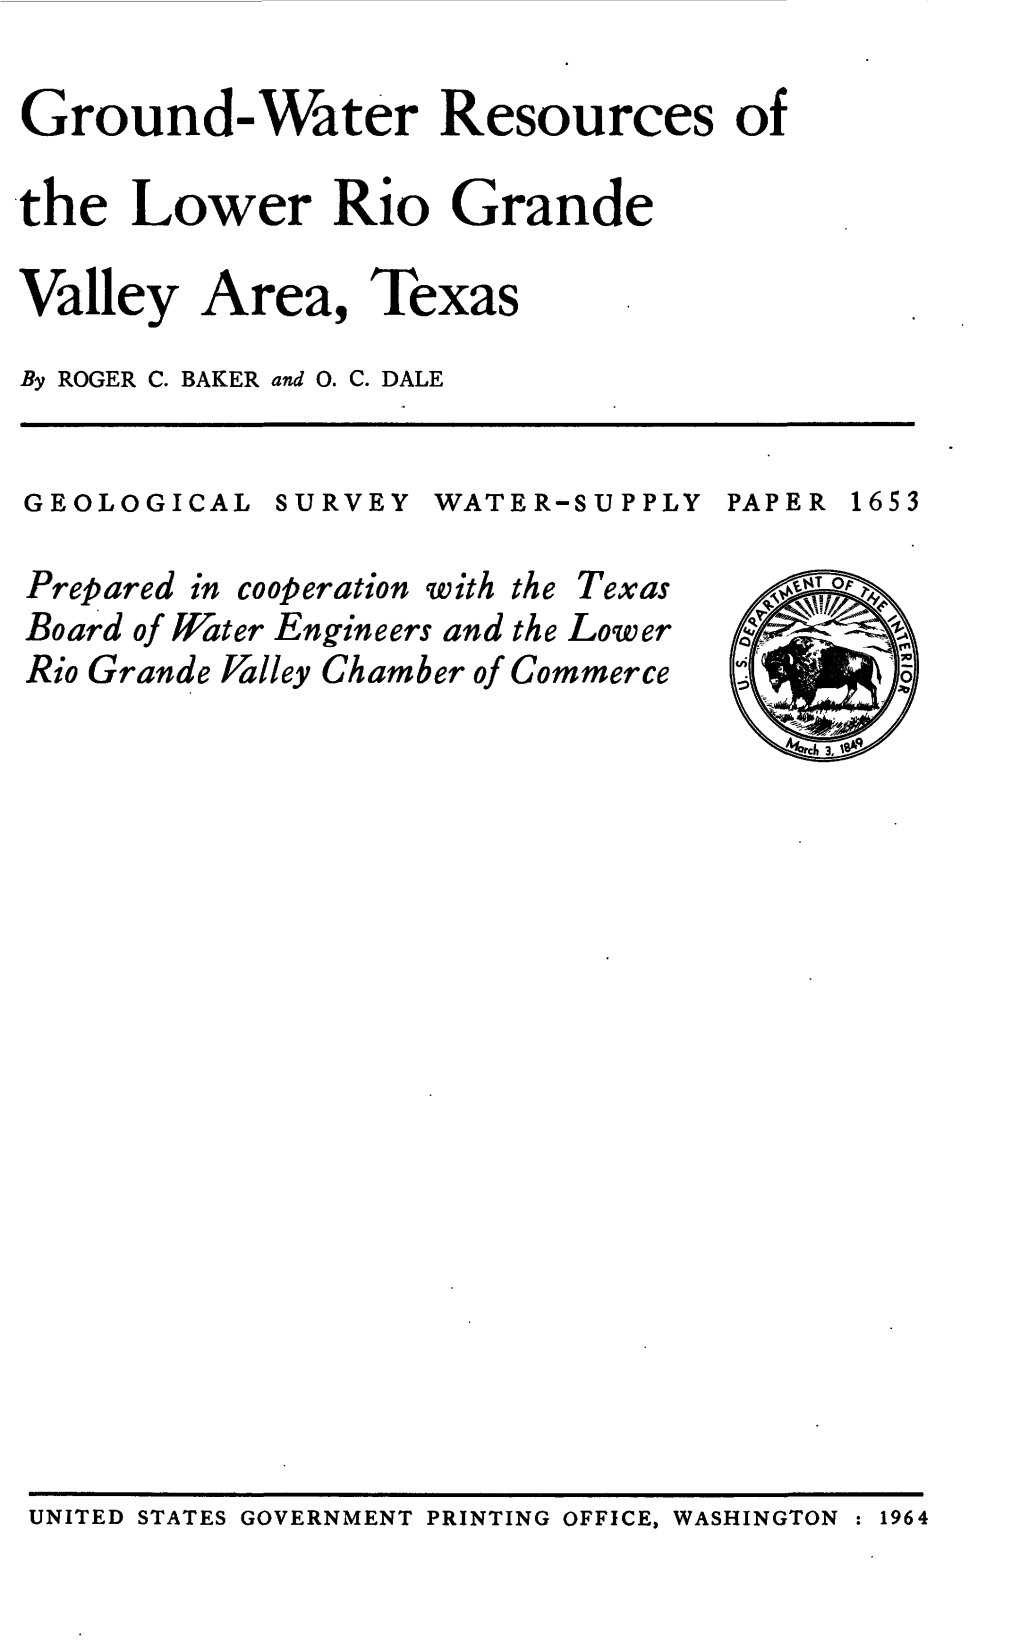 Ground-Water Resources of the Lower Rio Grande Valley Area, Texas